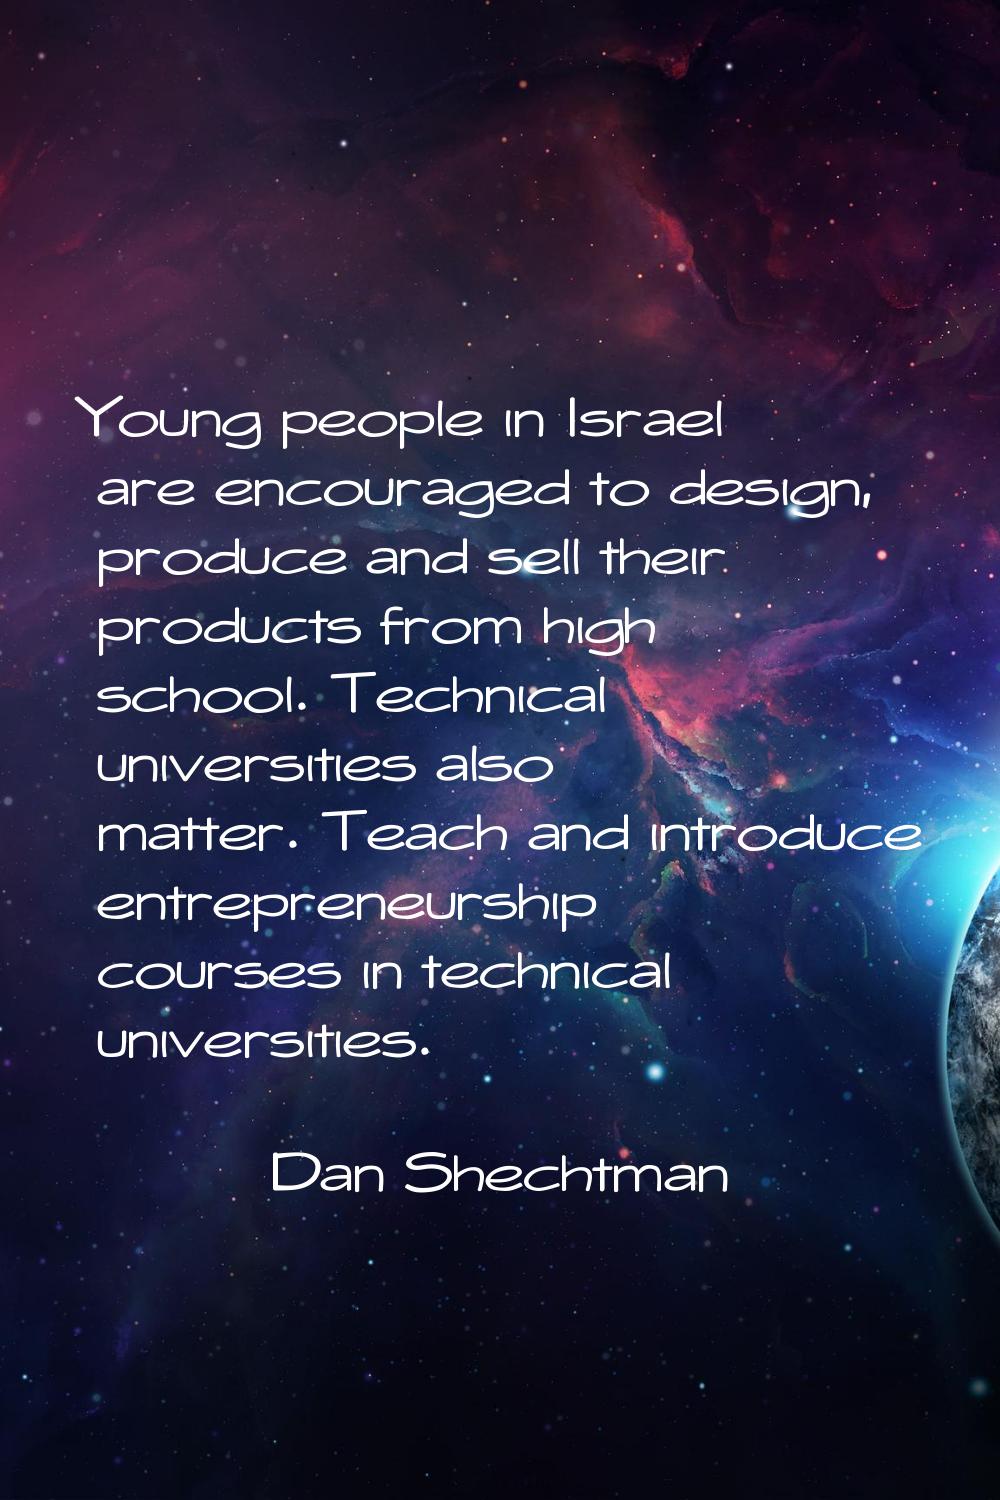 Young people in Israel are encouraged to design, produce and sell their products from high school. 